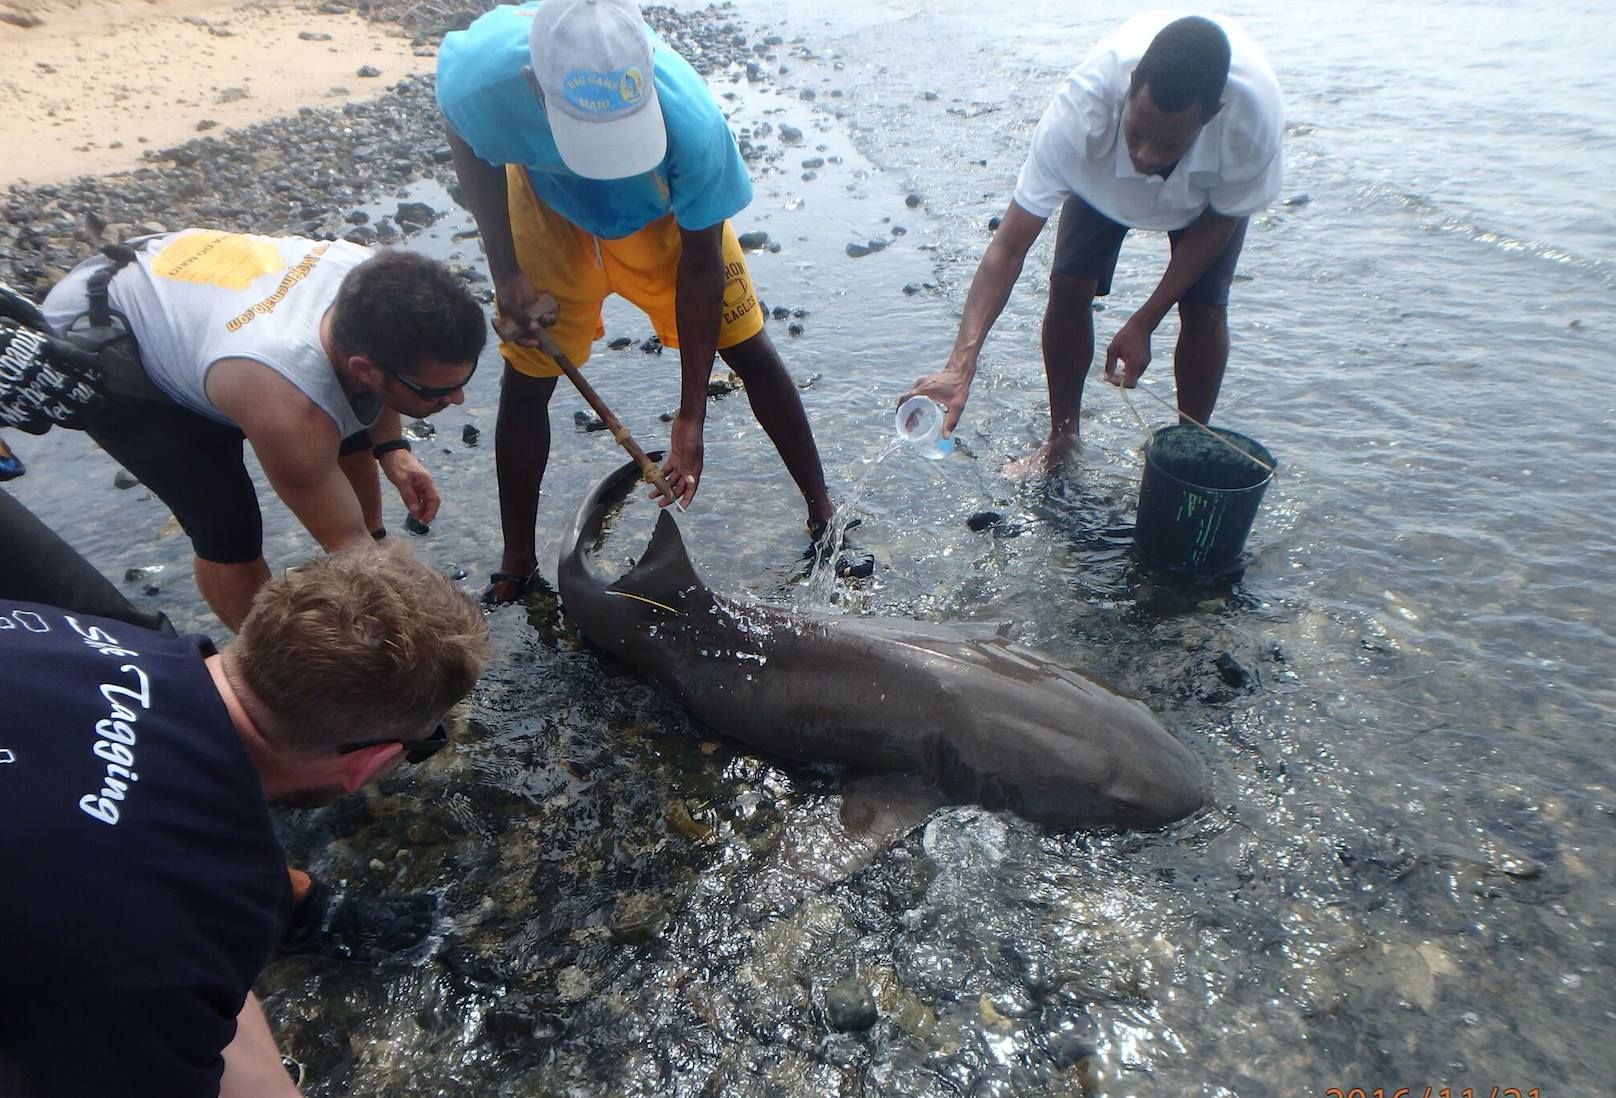 Dalhousie/OTN researcher, Manuel Dureuil externally tagging a nurse shark with researchers in Cabo Verde.